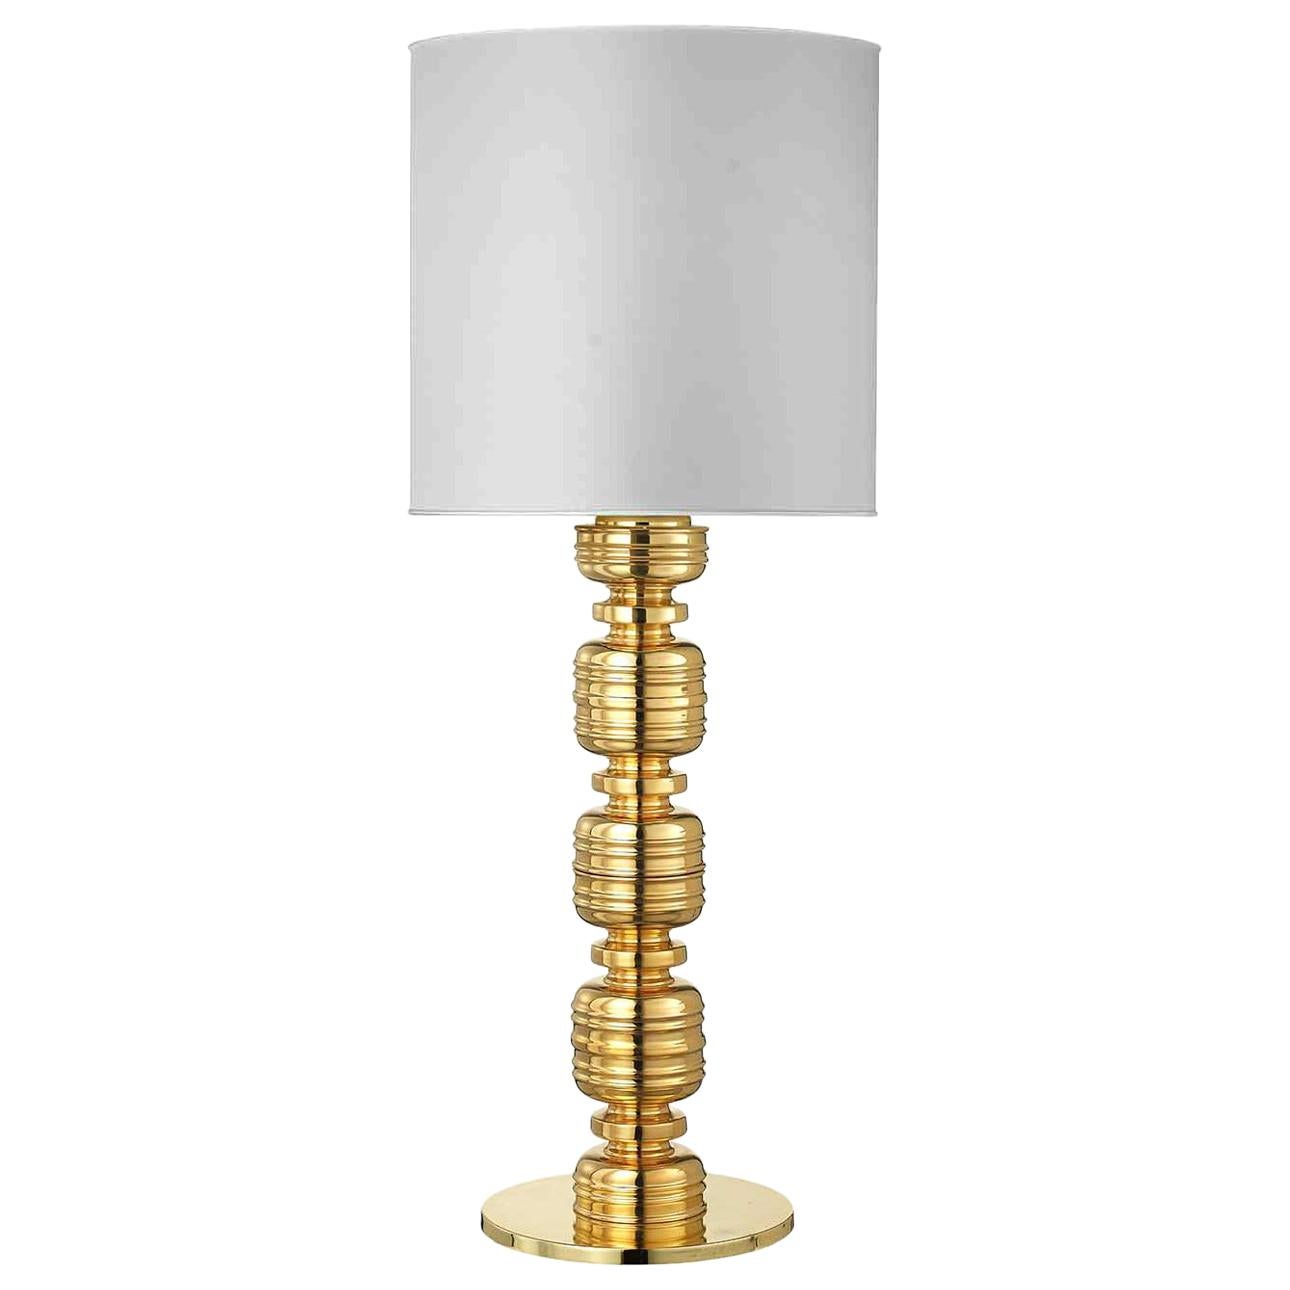 THEA 2, Ceramic Lamp Handcrafted in 24-Karat Gold by Gabriella B. Made in Italy For Sale